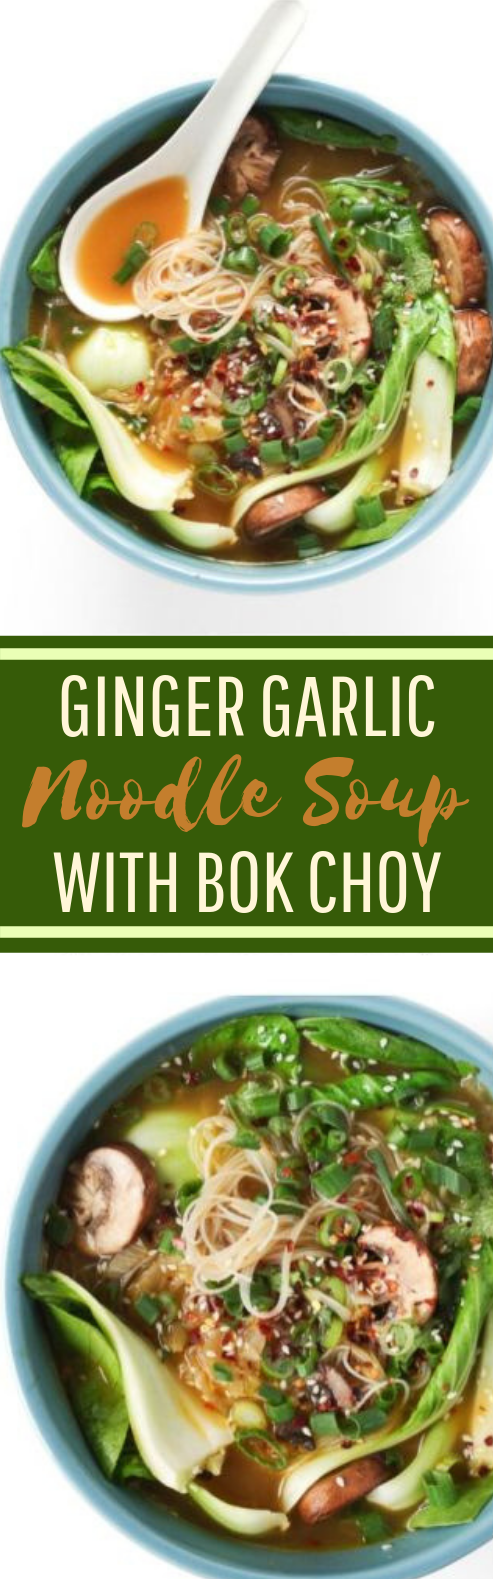 Ginger Garlic Noodle Soup with Bok Choy #healthy #soup